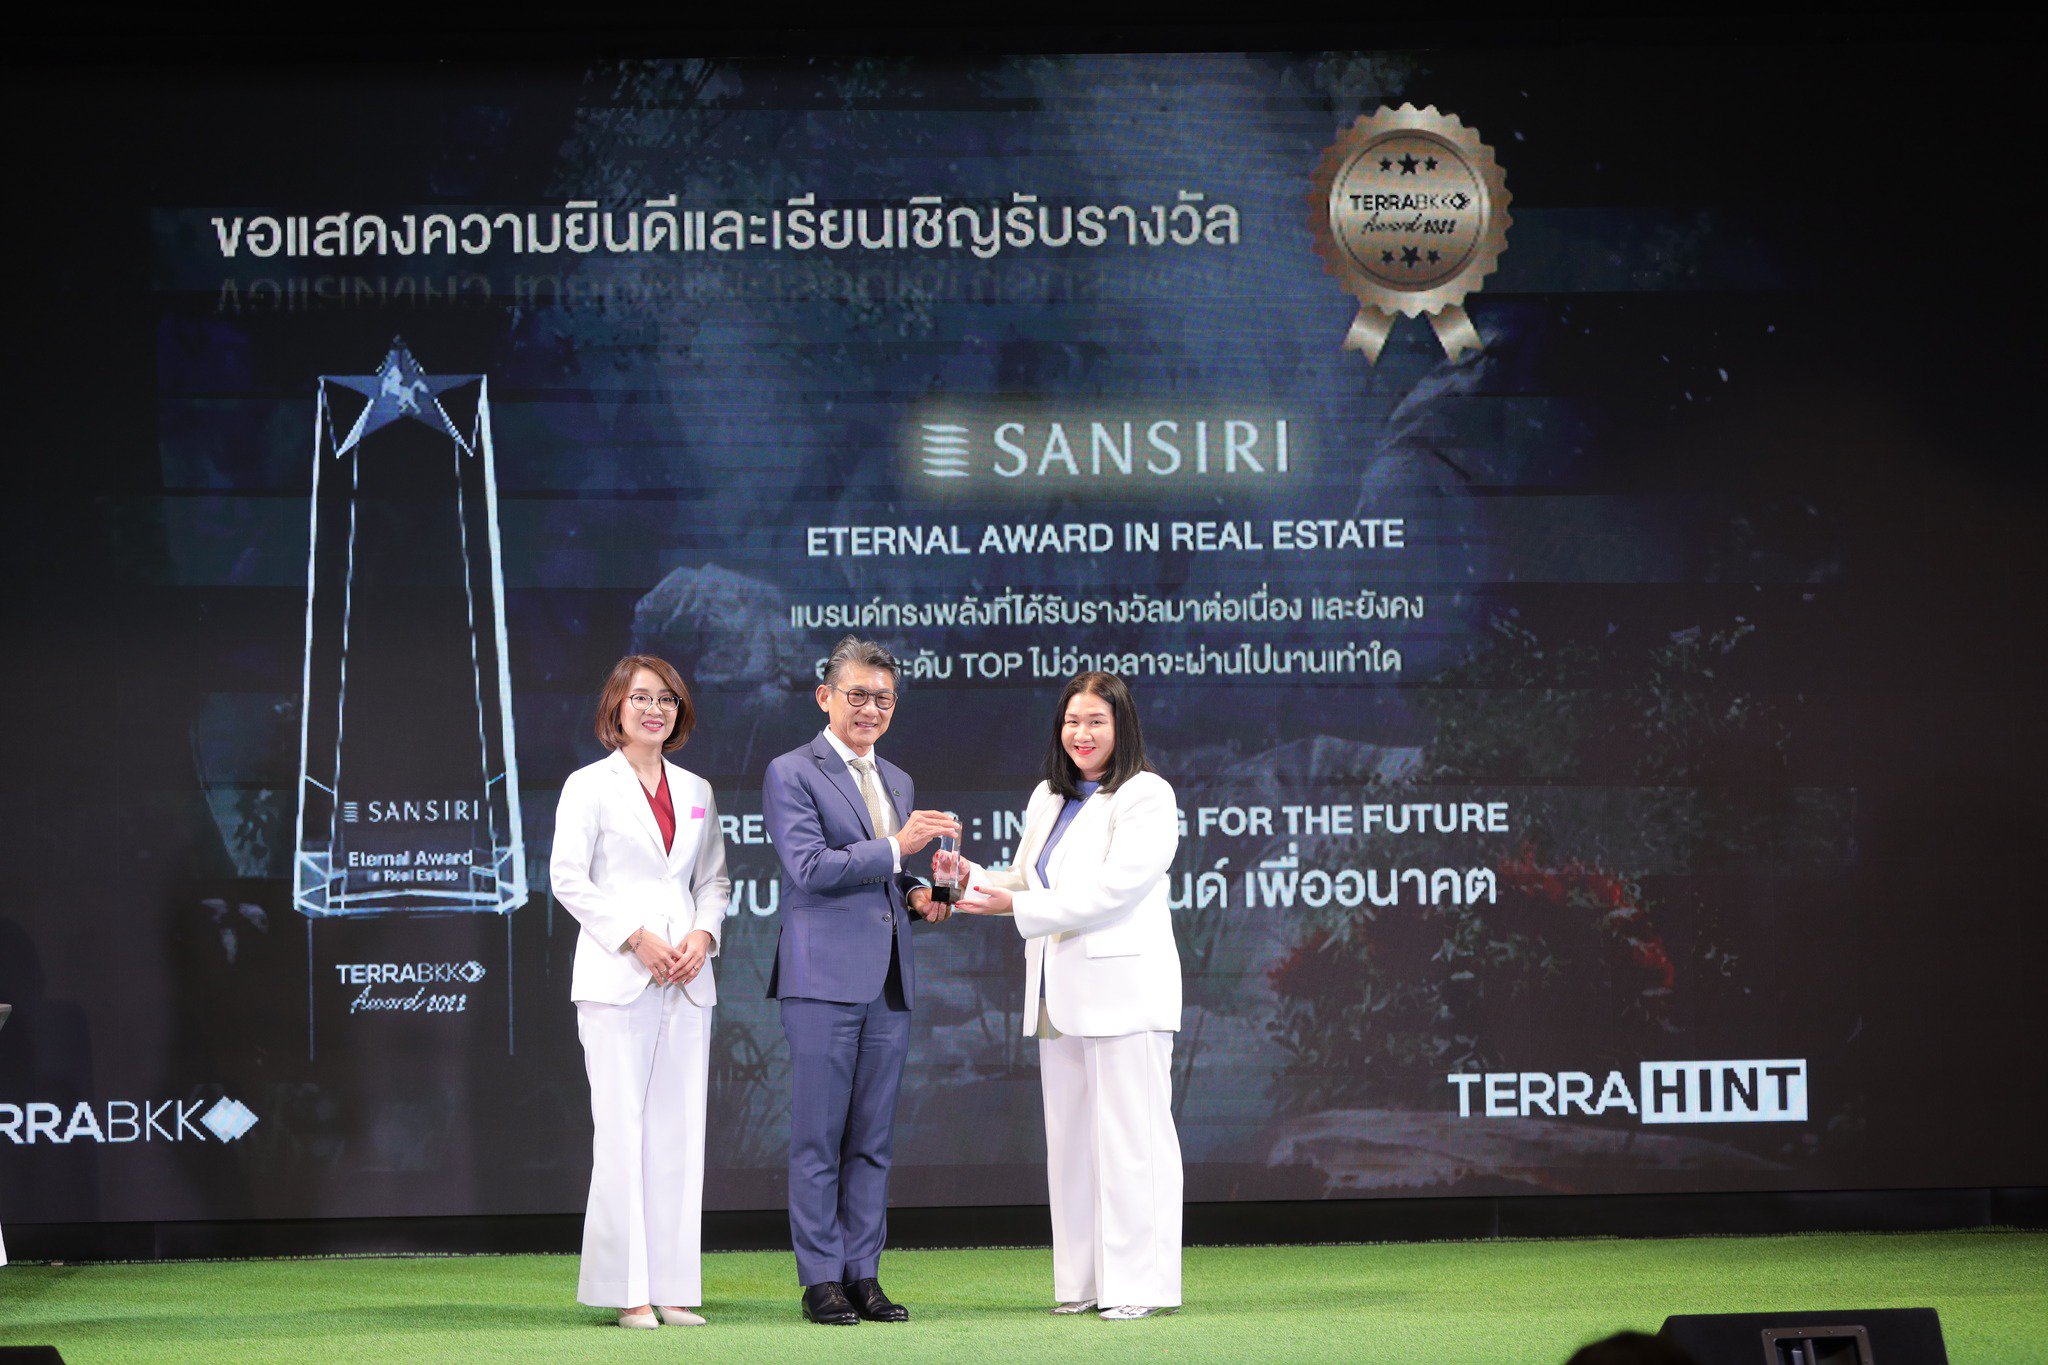 Sansiri Dubbed “Most Powerful” Brand for 5 Consecutive Years, Achieves “Legendary” Status in Thai Real-Estate Industry